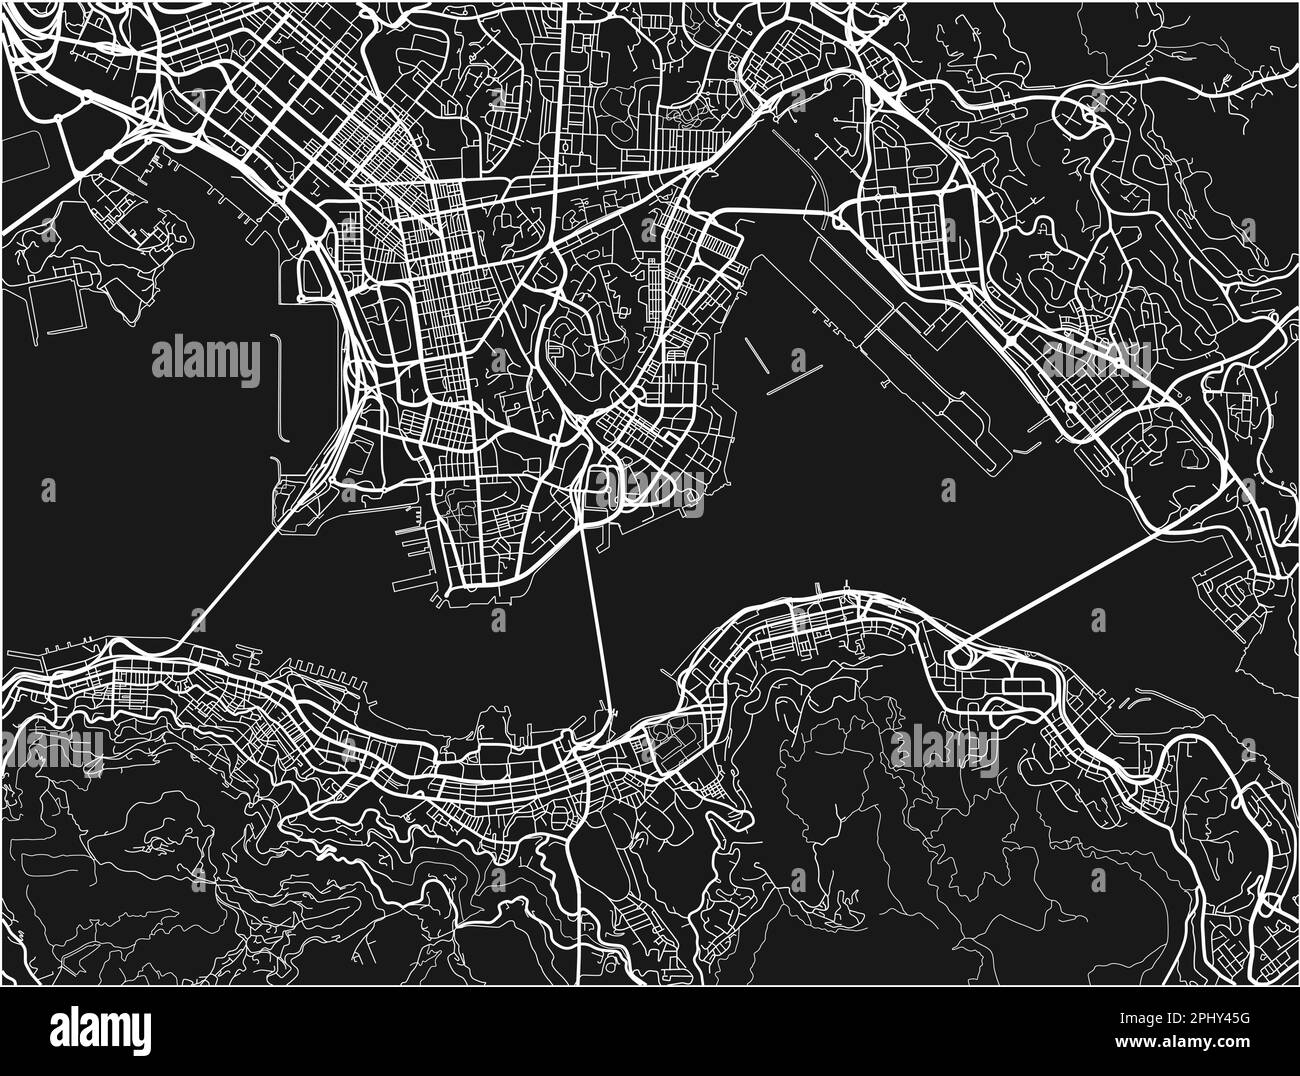 Black and white vector city map of Hong Kong with well organized separated layers. Stock Vector